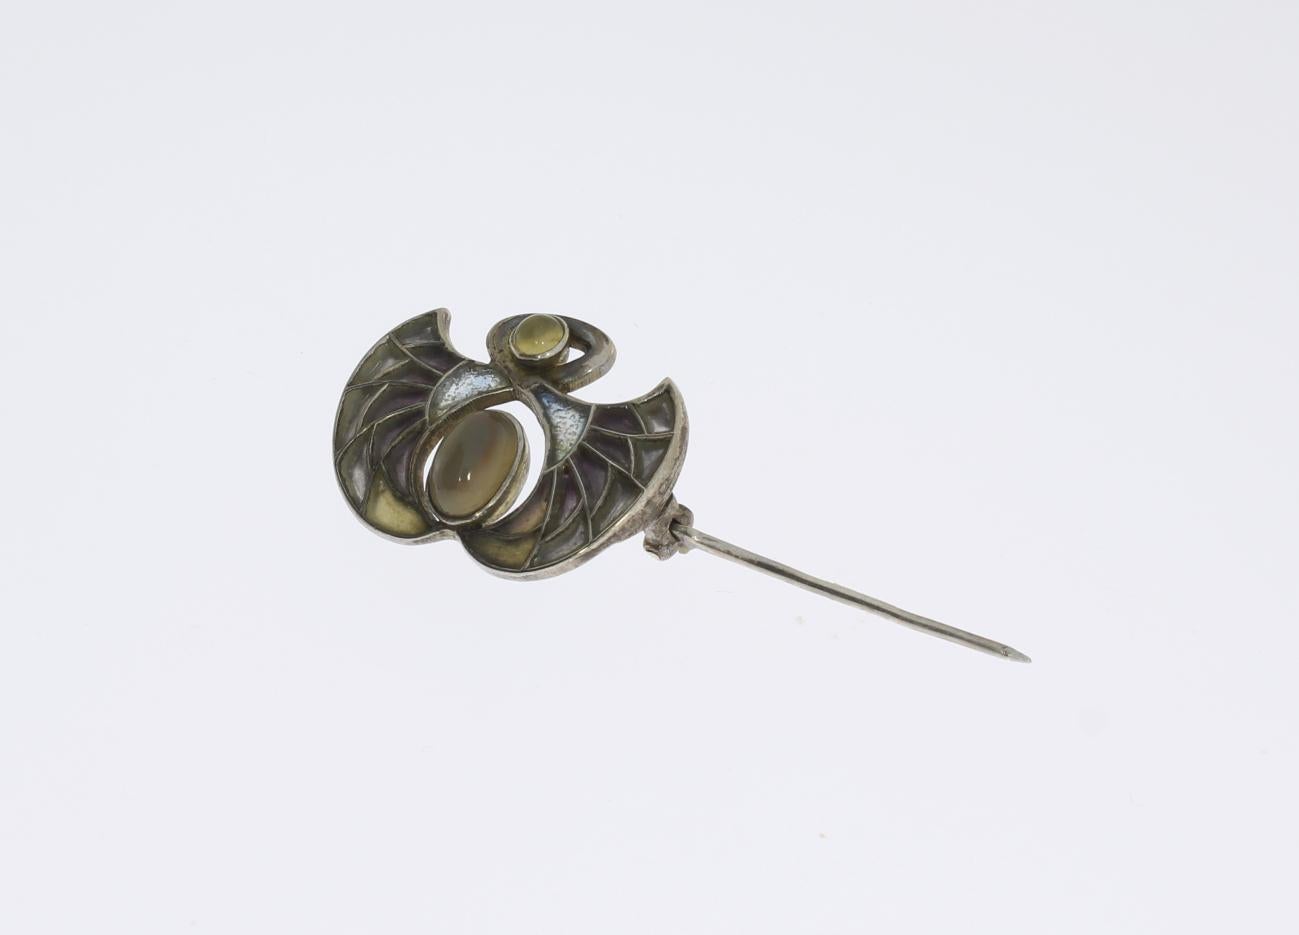 The brooch was made by Heinrich Levinger in Pforzheim, Germany, around 1902. Stylized wings form with plique-a-jour enamel decoration and 2 cabochon stones. Mounted in Silver. Marked on the back with DEPOSE STERLING. 
Weight: 4,55 g. Measurements